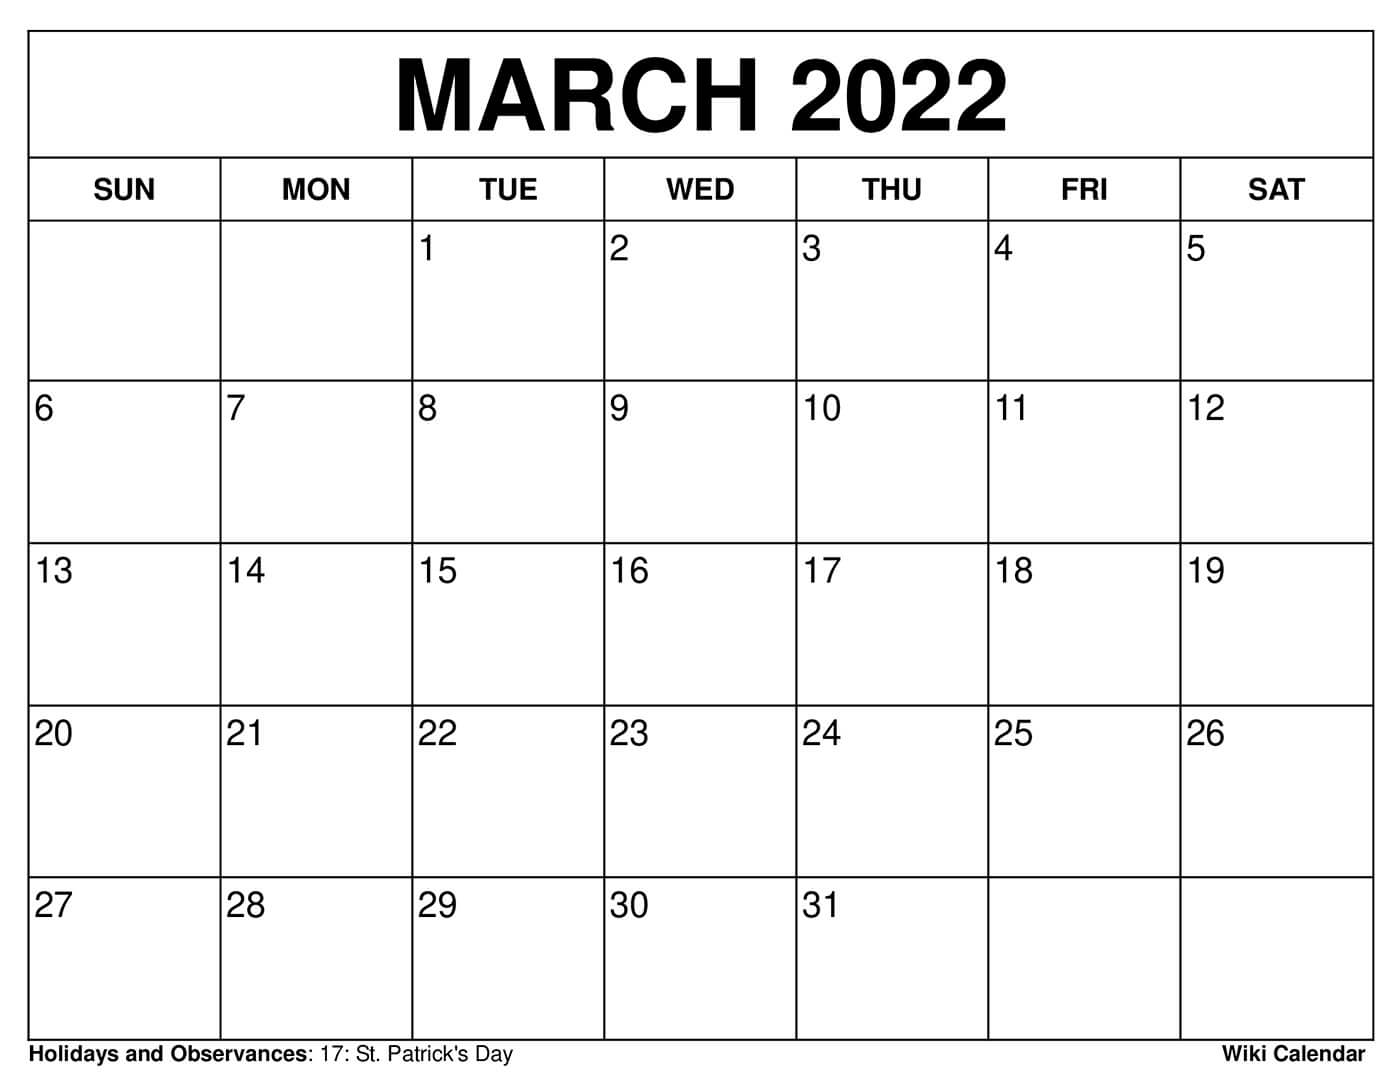 March Calendar 2022 With Holidays Free Printable March 2022 Calendars - Wiki Calendar